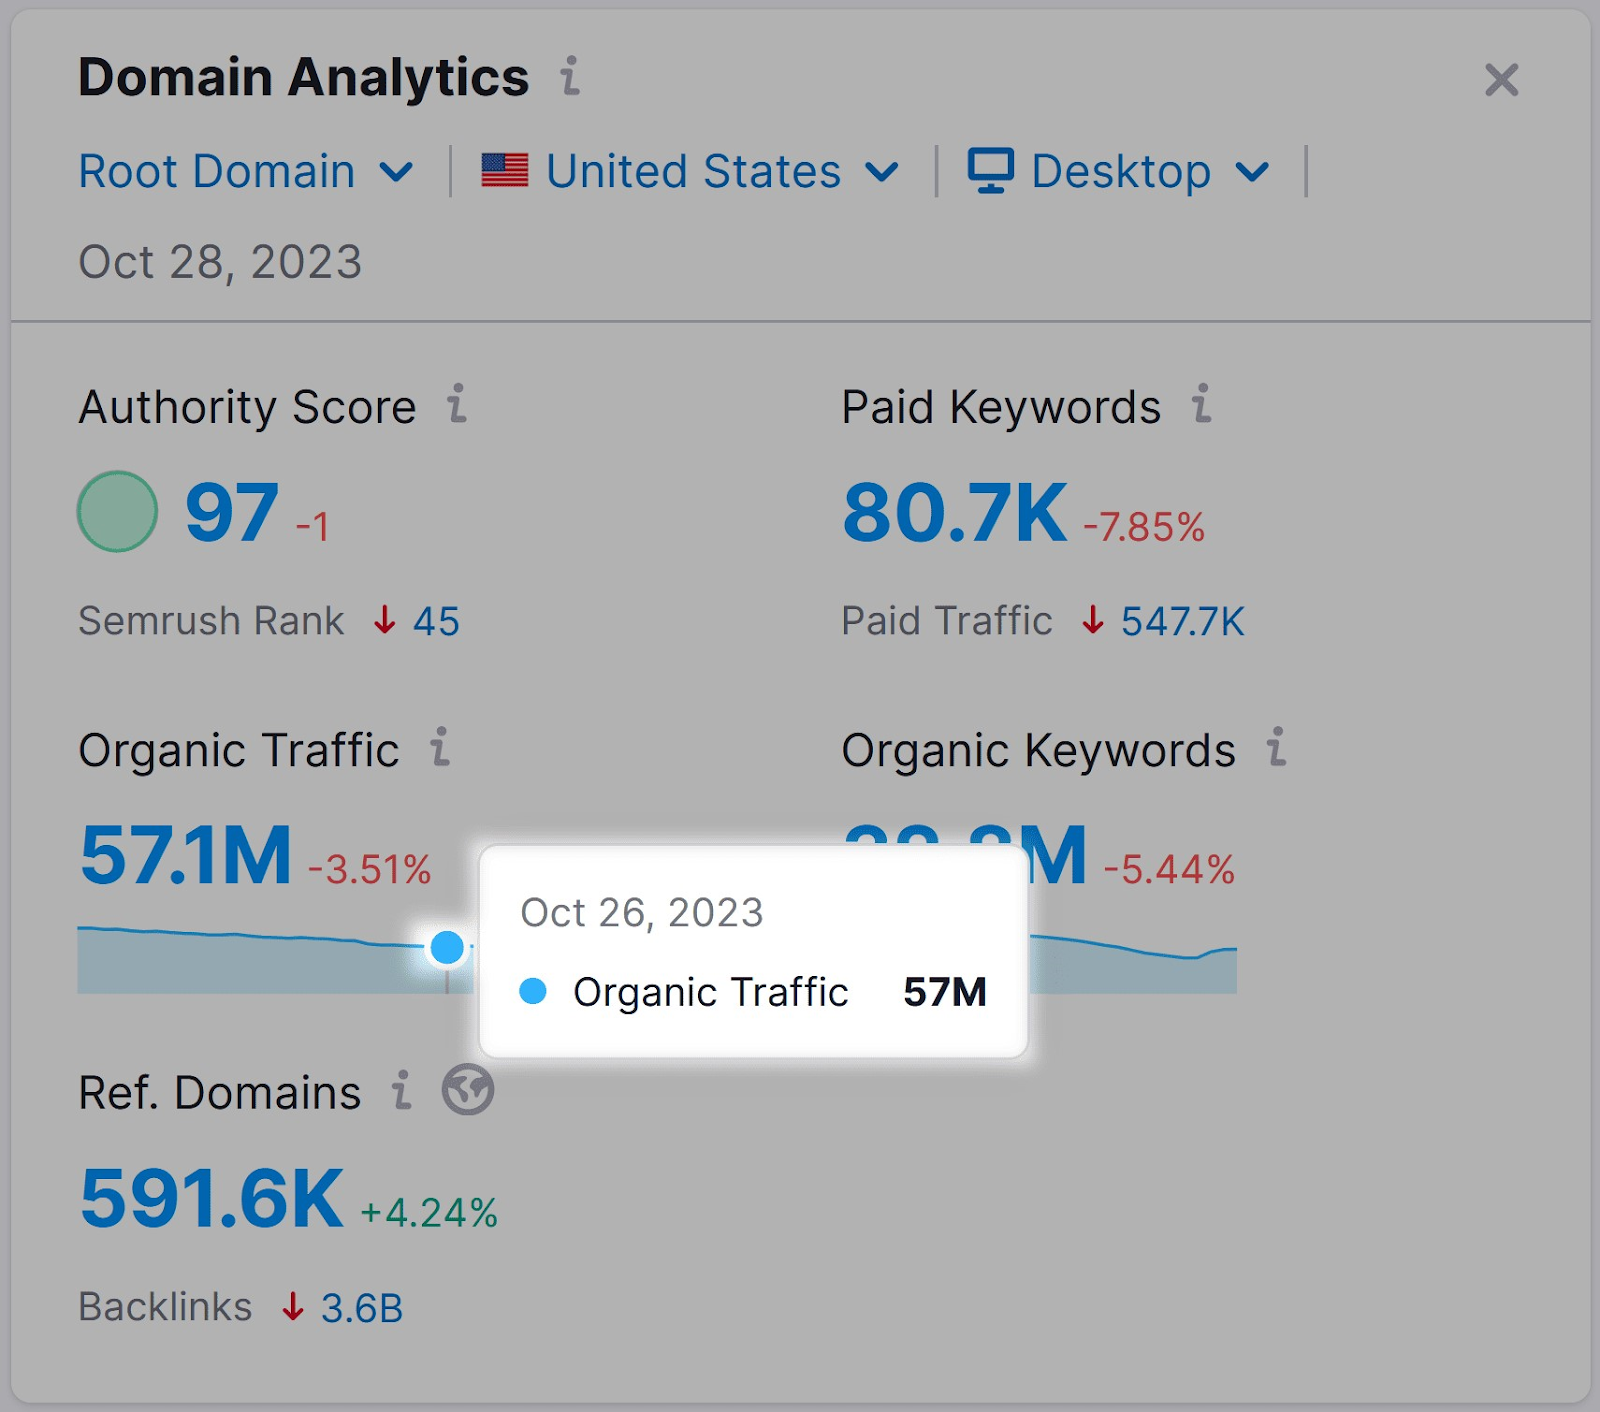 "Organic traffic" metric for Oct 26, 2023 shows "57M"